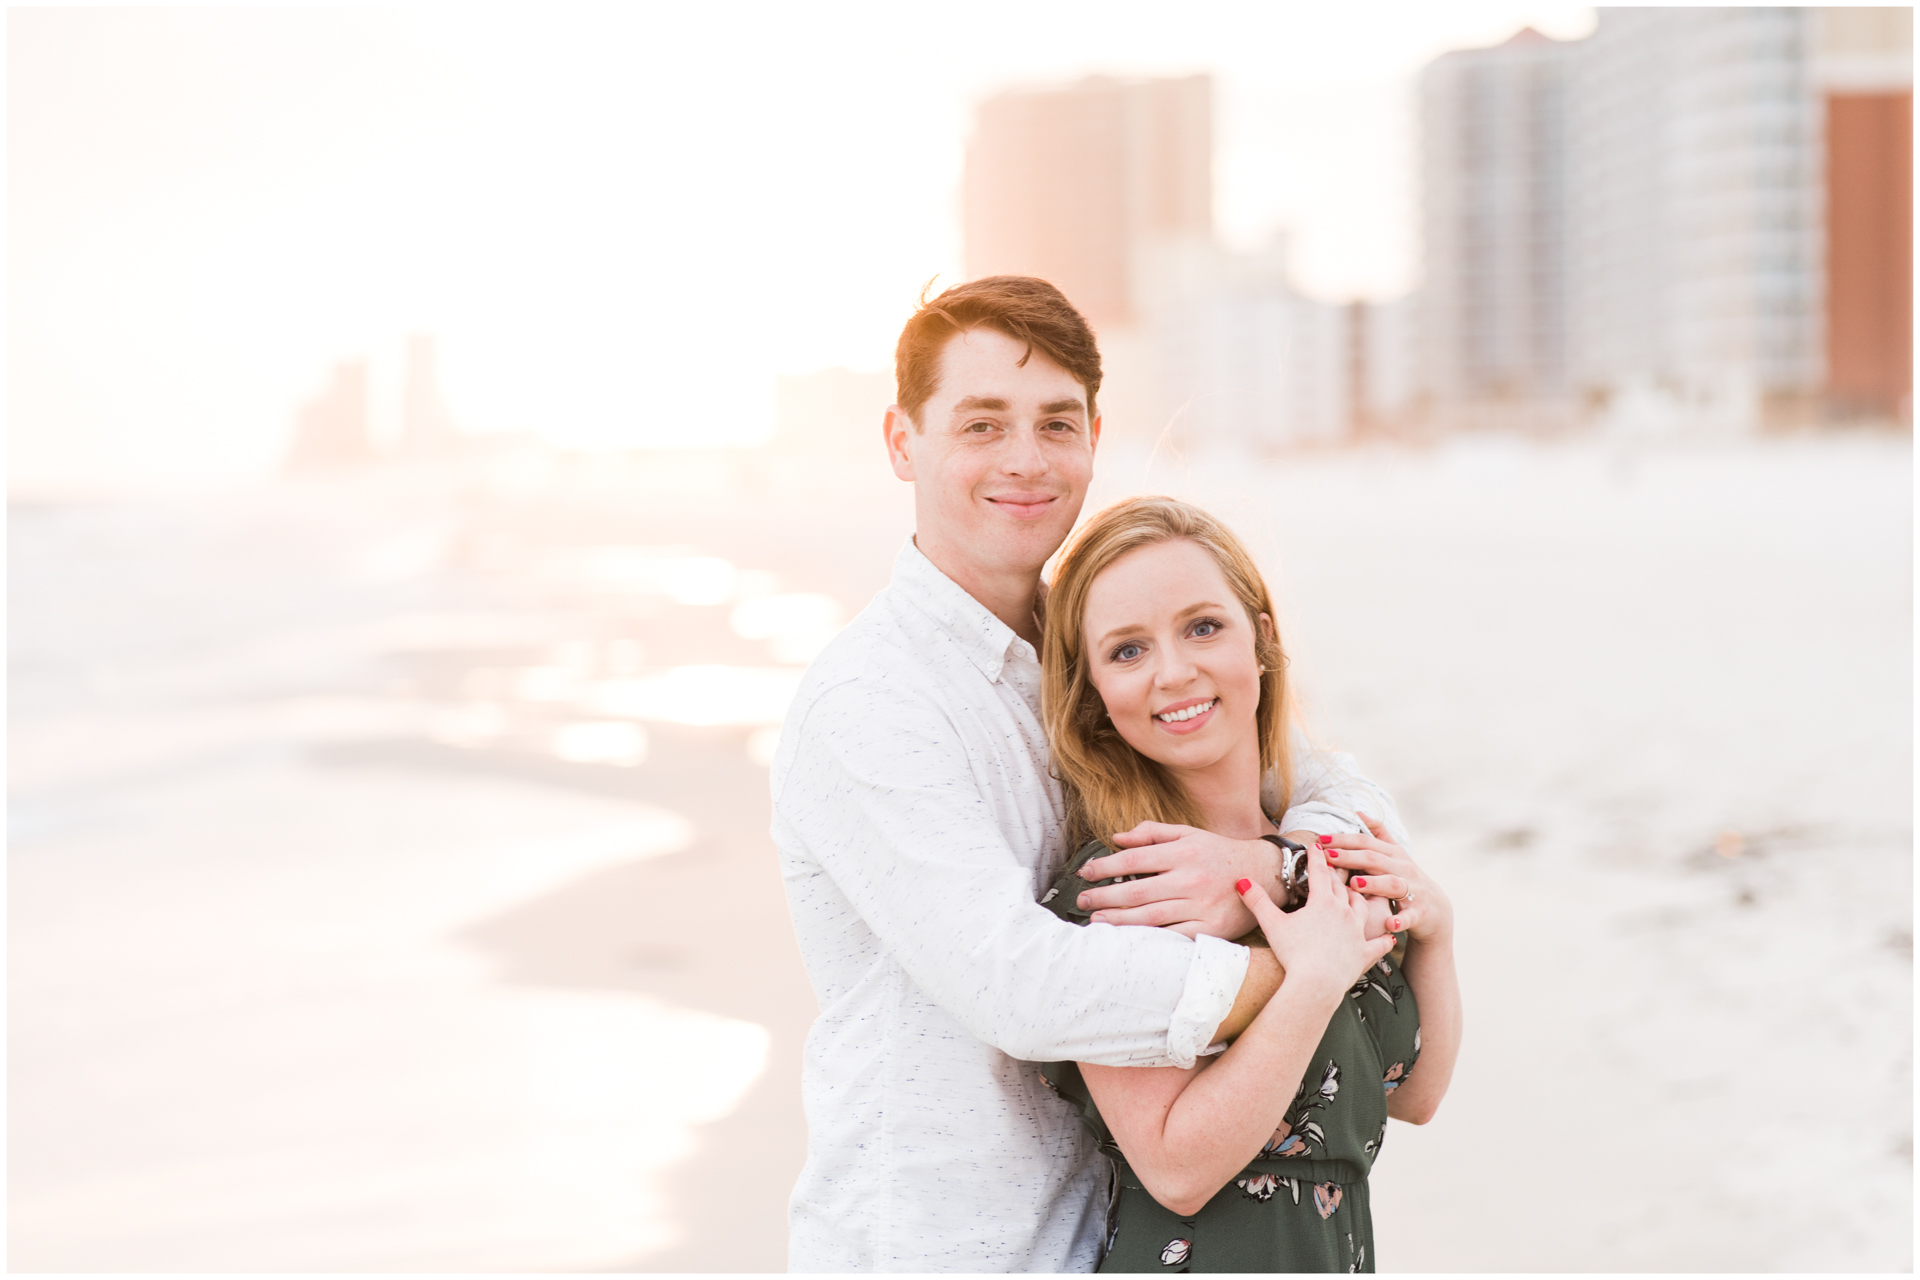 Engagement Session with Gulf Shore Beach skyline in background